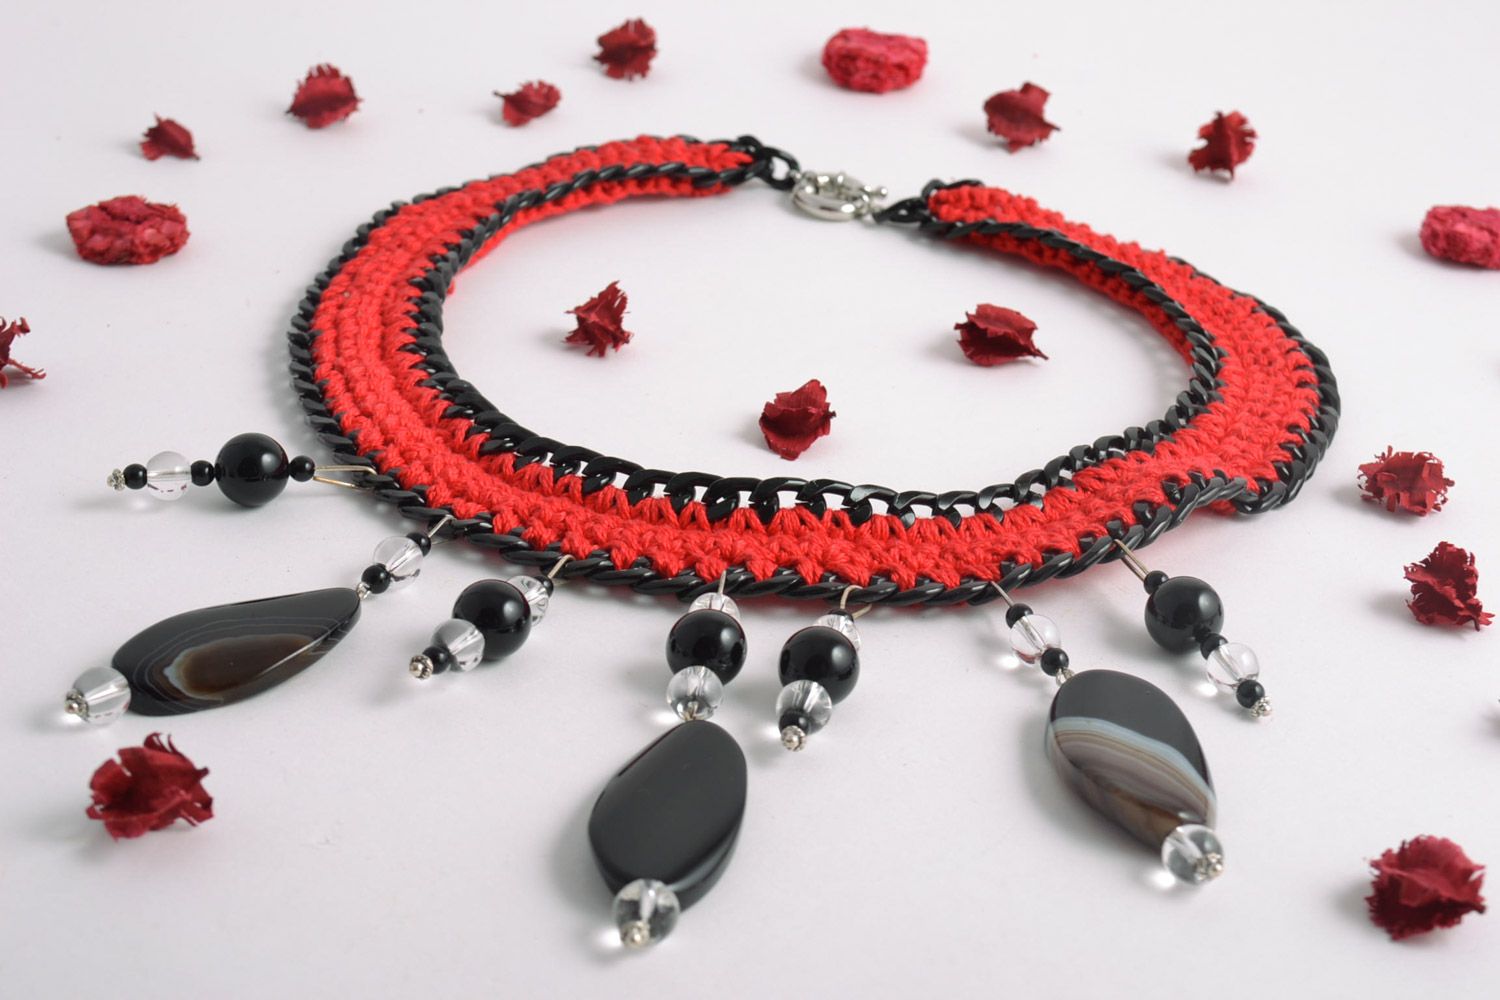 Strict handmade gemstone crochet necklace of red and black colors photo 1